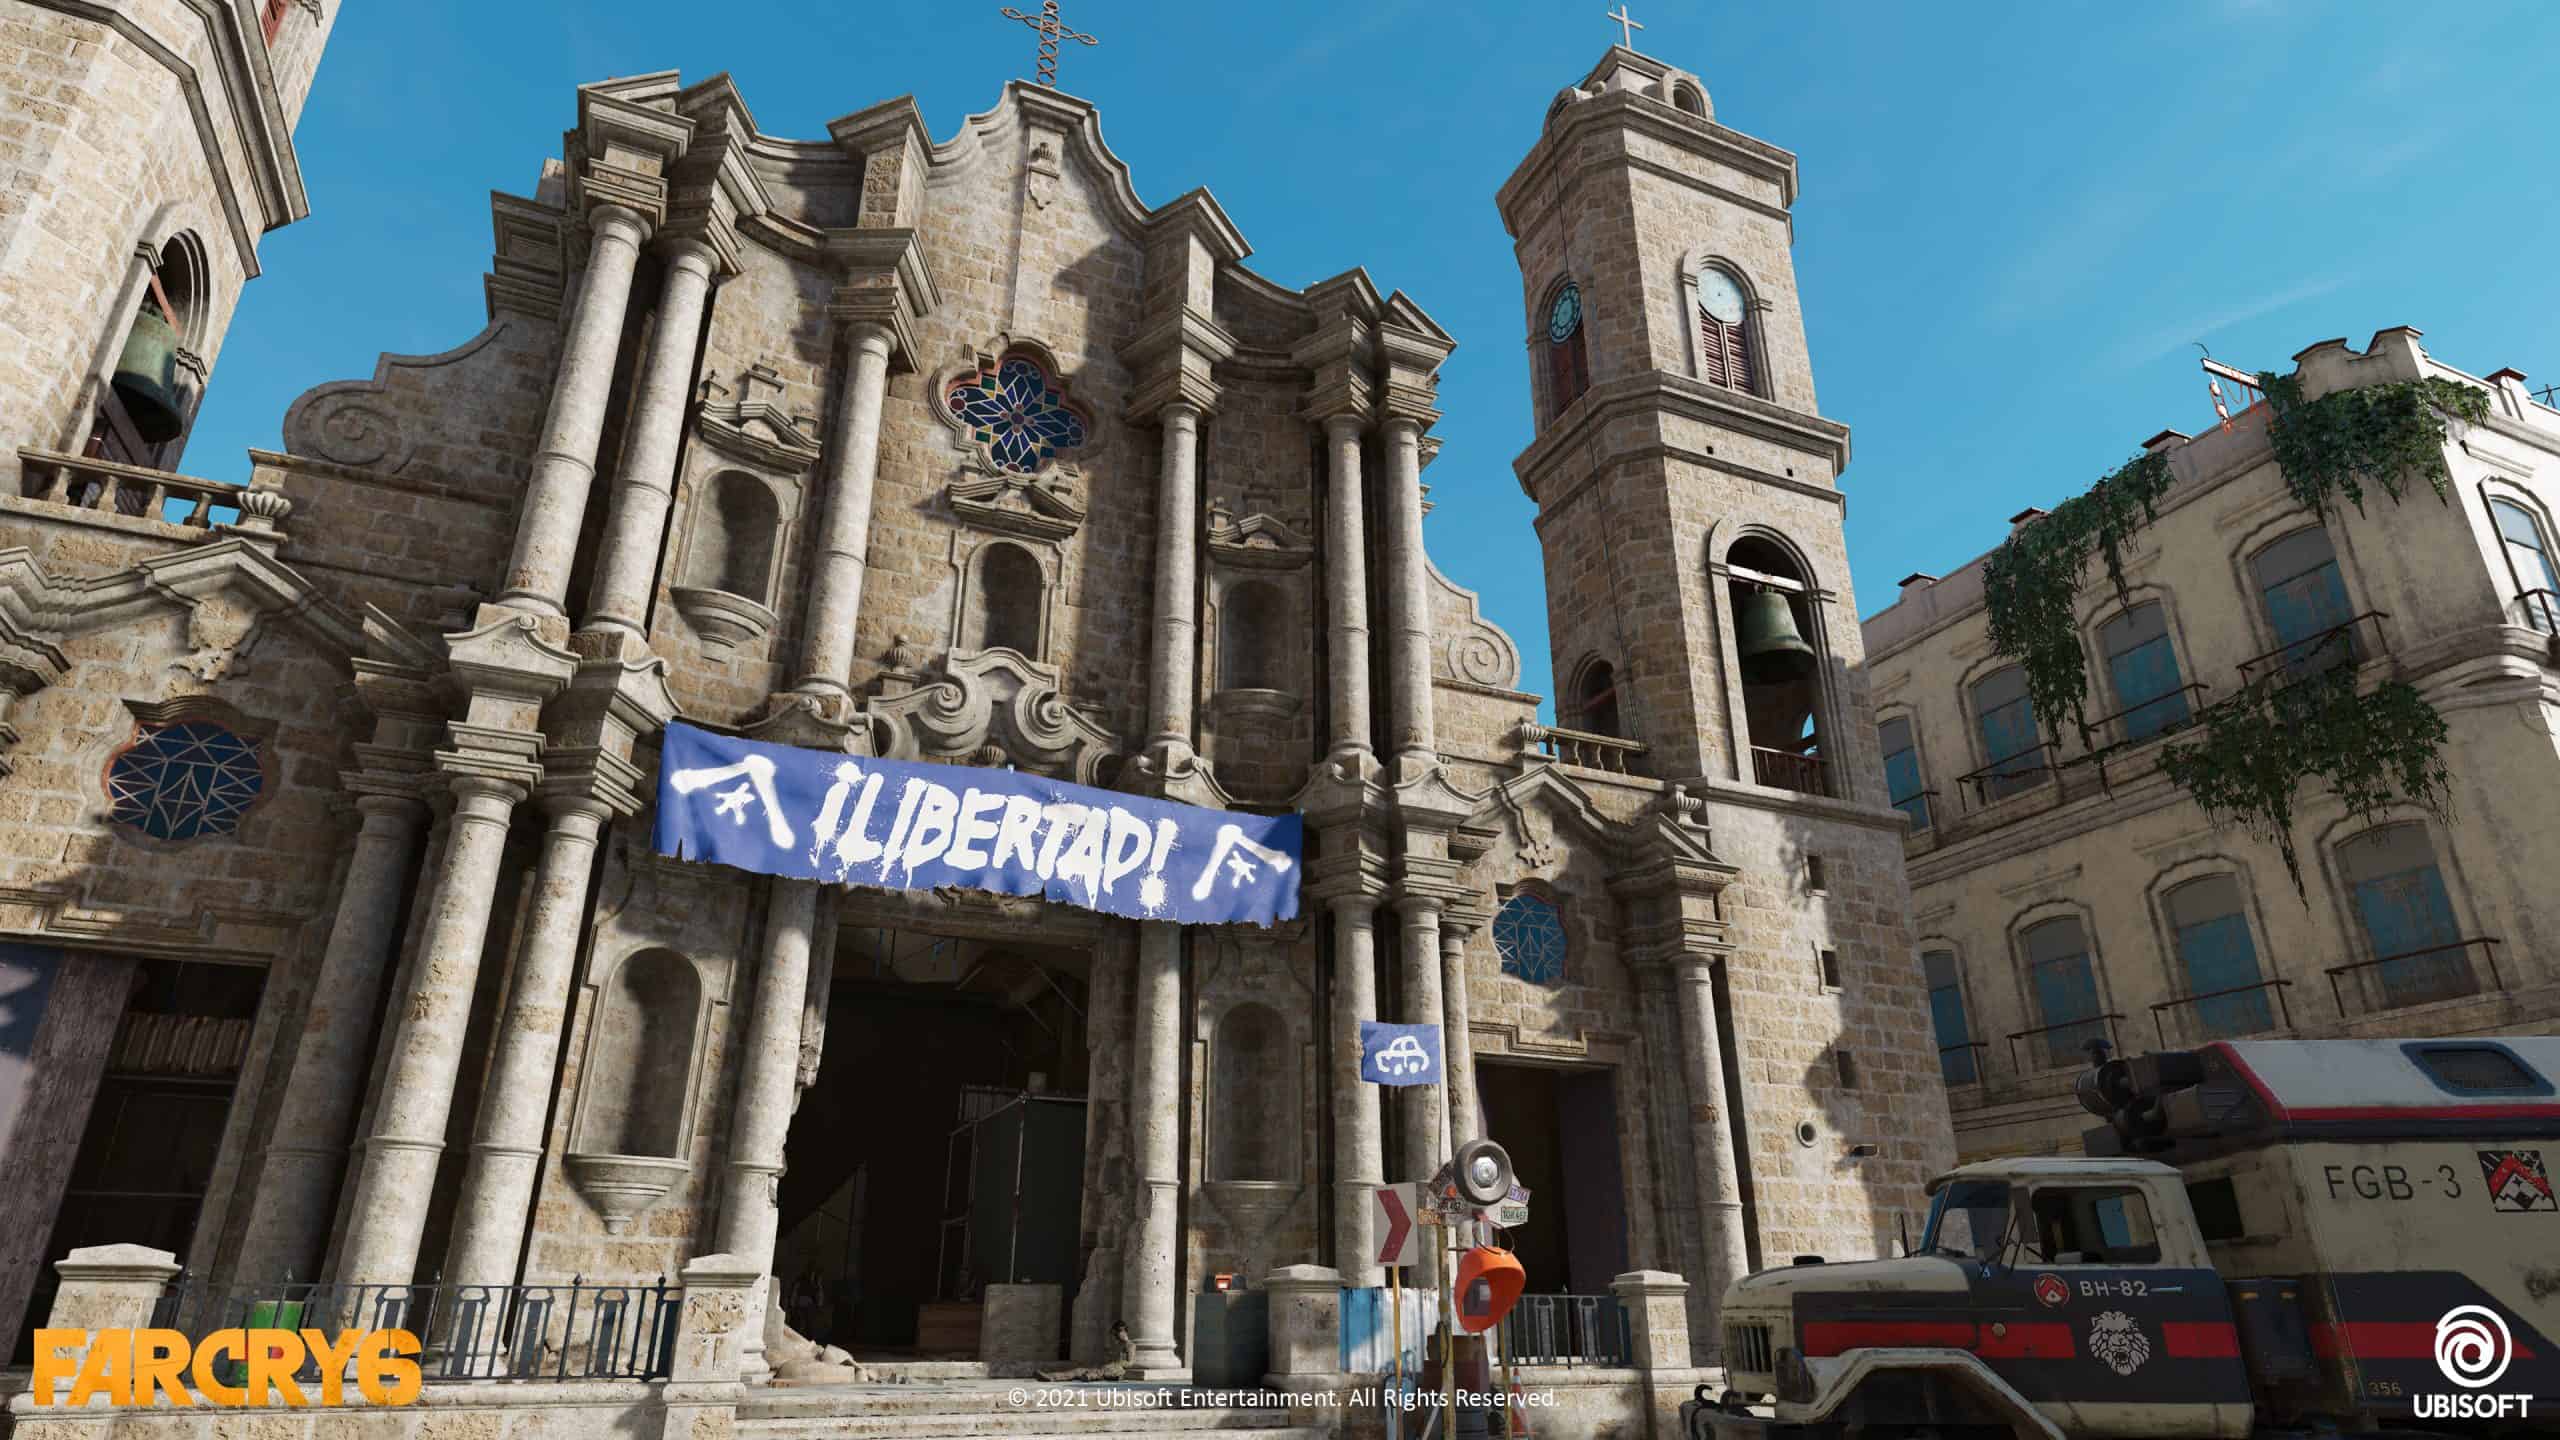 Cathedral with blue Libertad banner